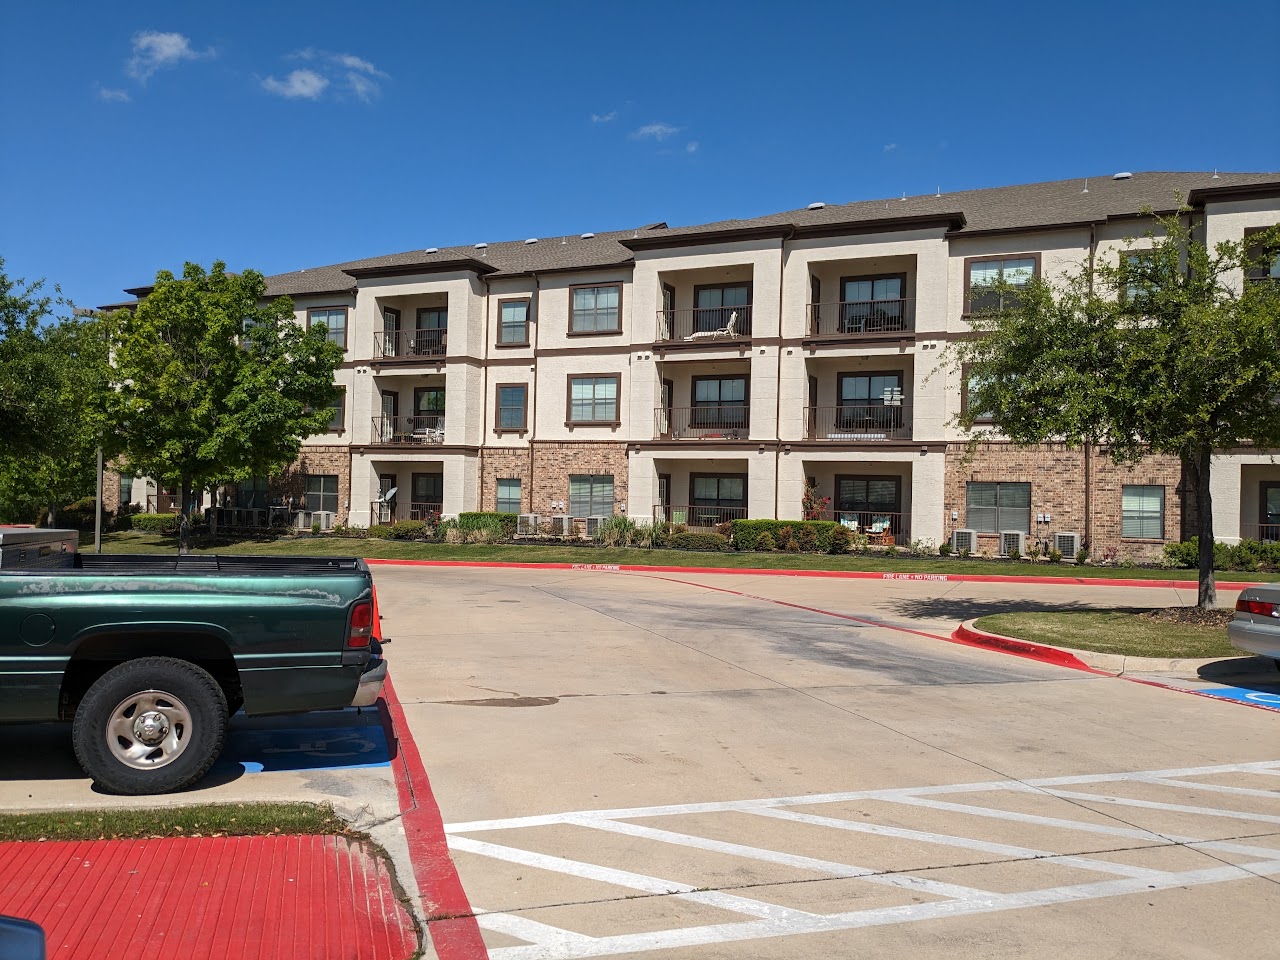 Photo of LINDBERGH PARC SENIOR APARTMENTS. Affordable housing located at 5600 AZLE AVE FORT WORTH, TX 76106